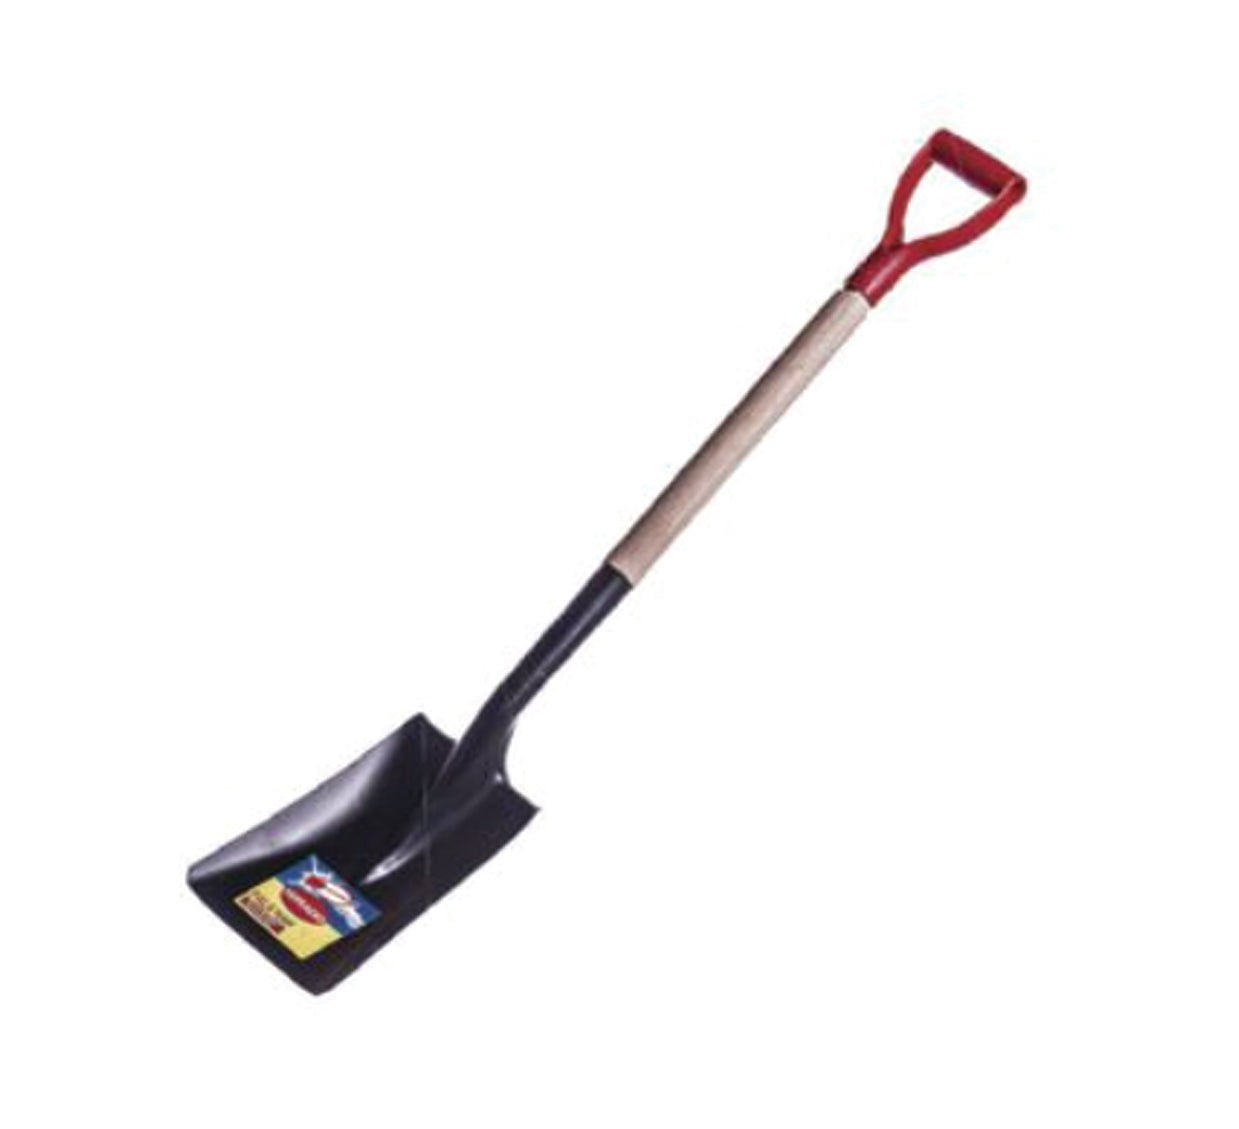 Square Point Shovel with wood Handle & Plastic Grip